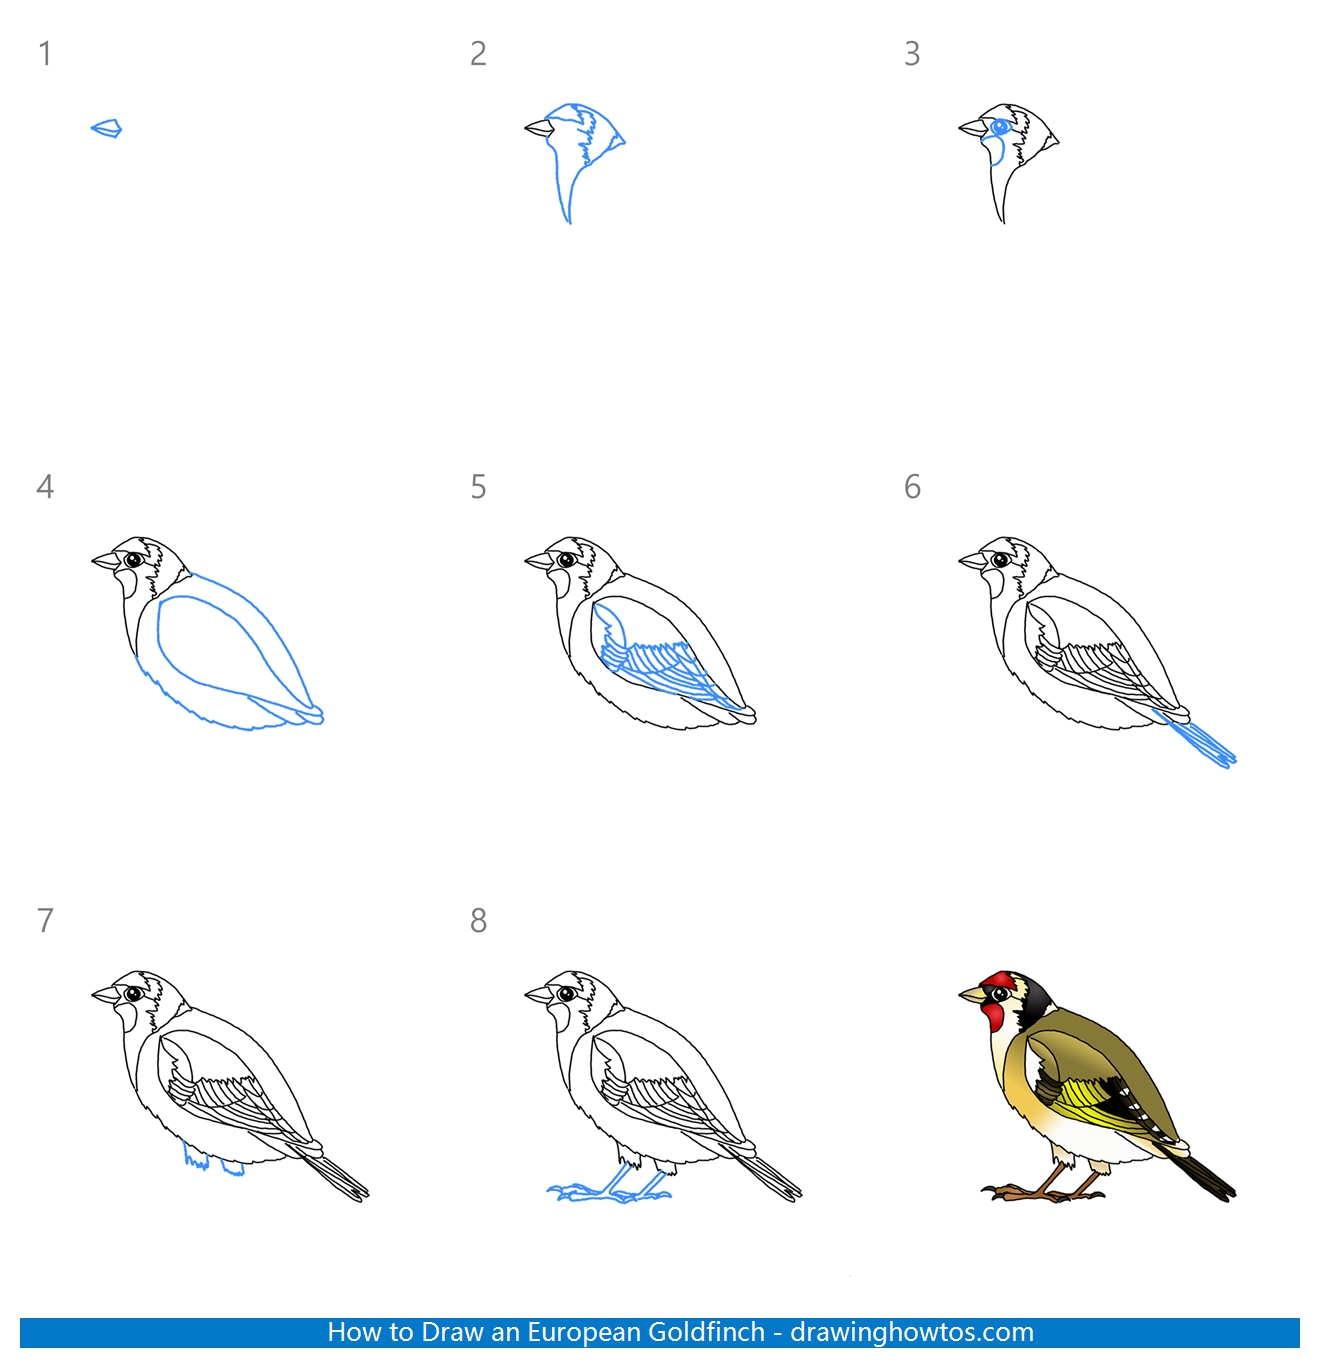 How to Draw a European Goldfinch Step by Step